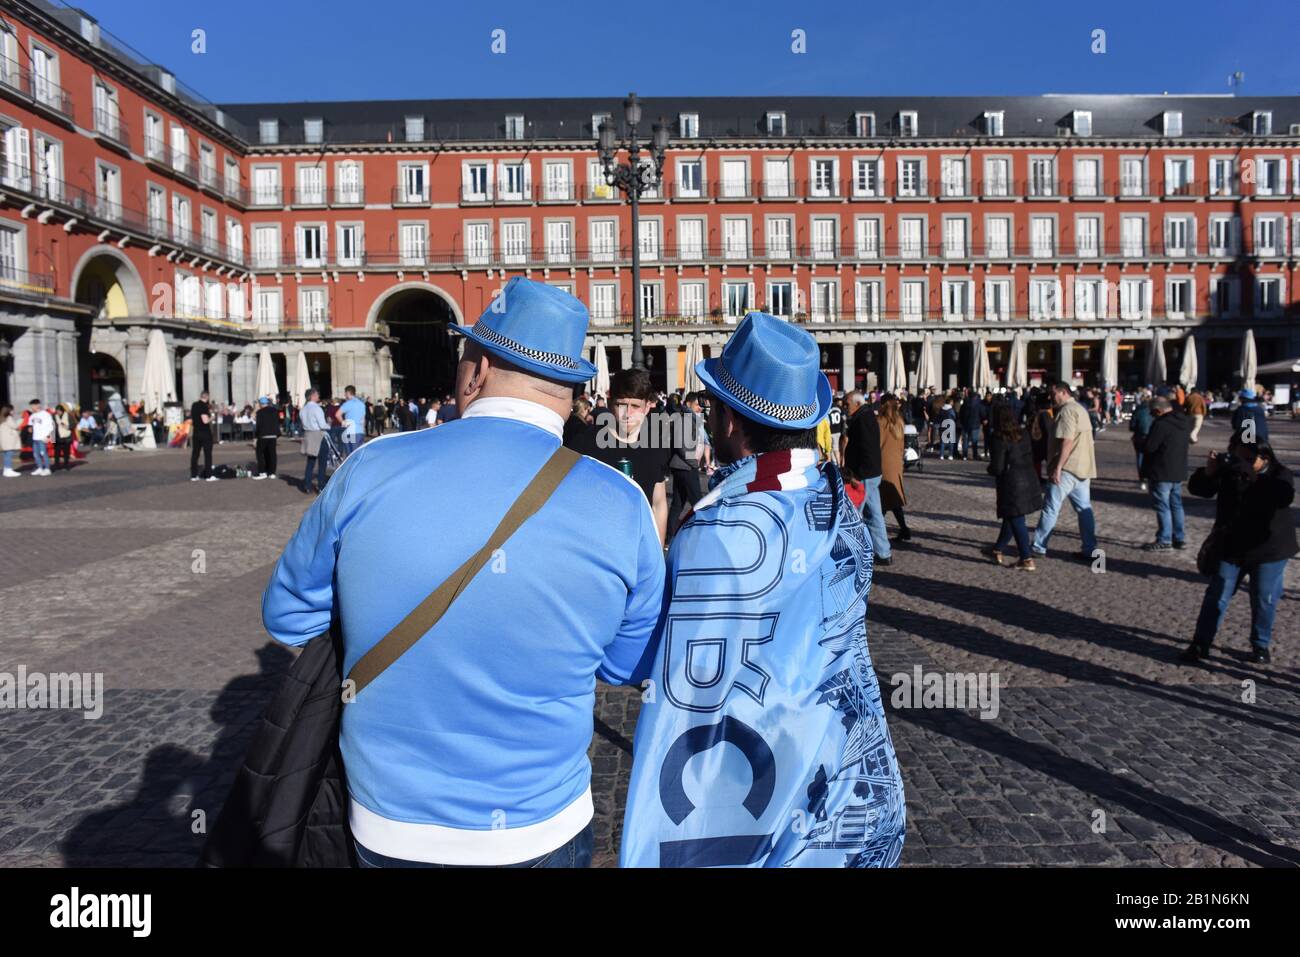 Manchester City fans are seen at Mayor square.Around 3.500 Manchester city  fans gather in central Madrid ahead of the UEFA Champions League match  between Real Madrid (Spain) and Manchester City (UK) at